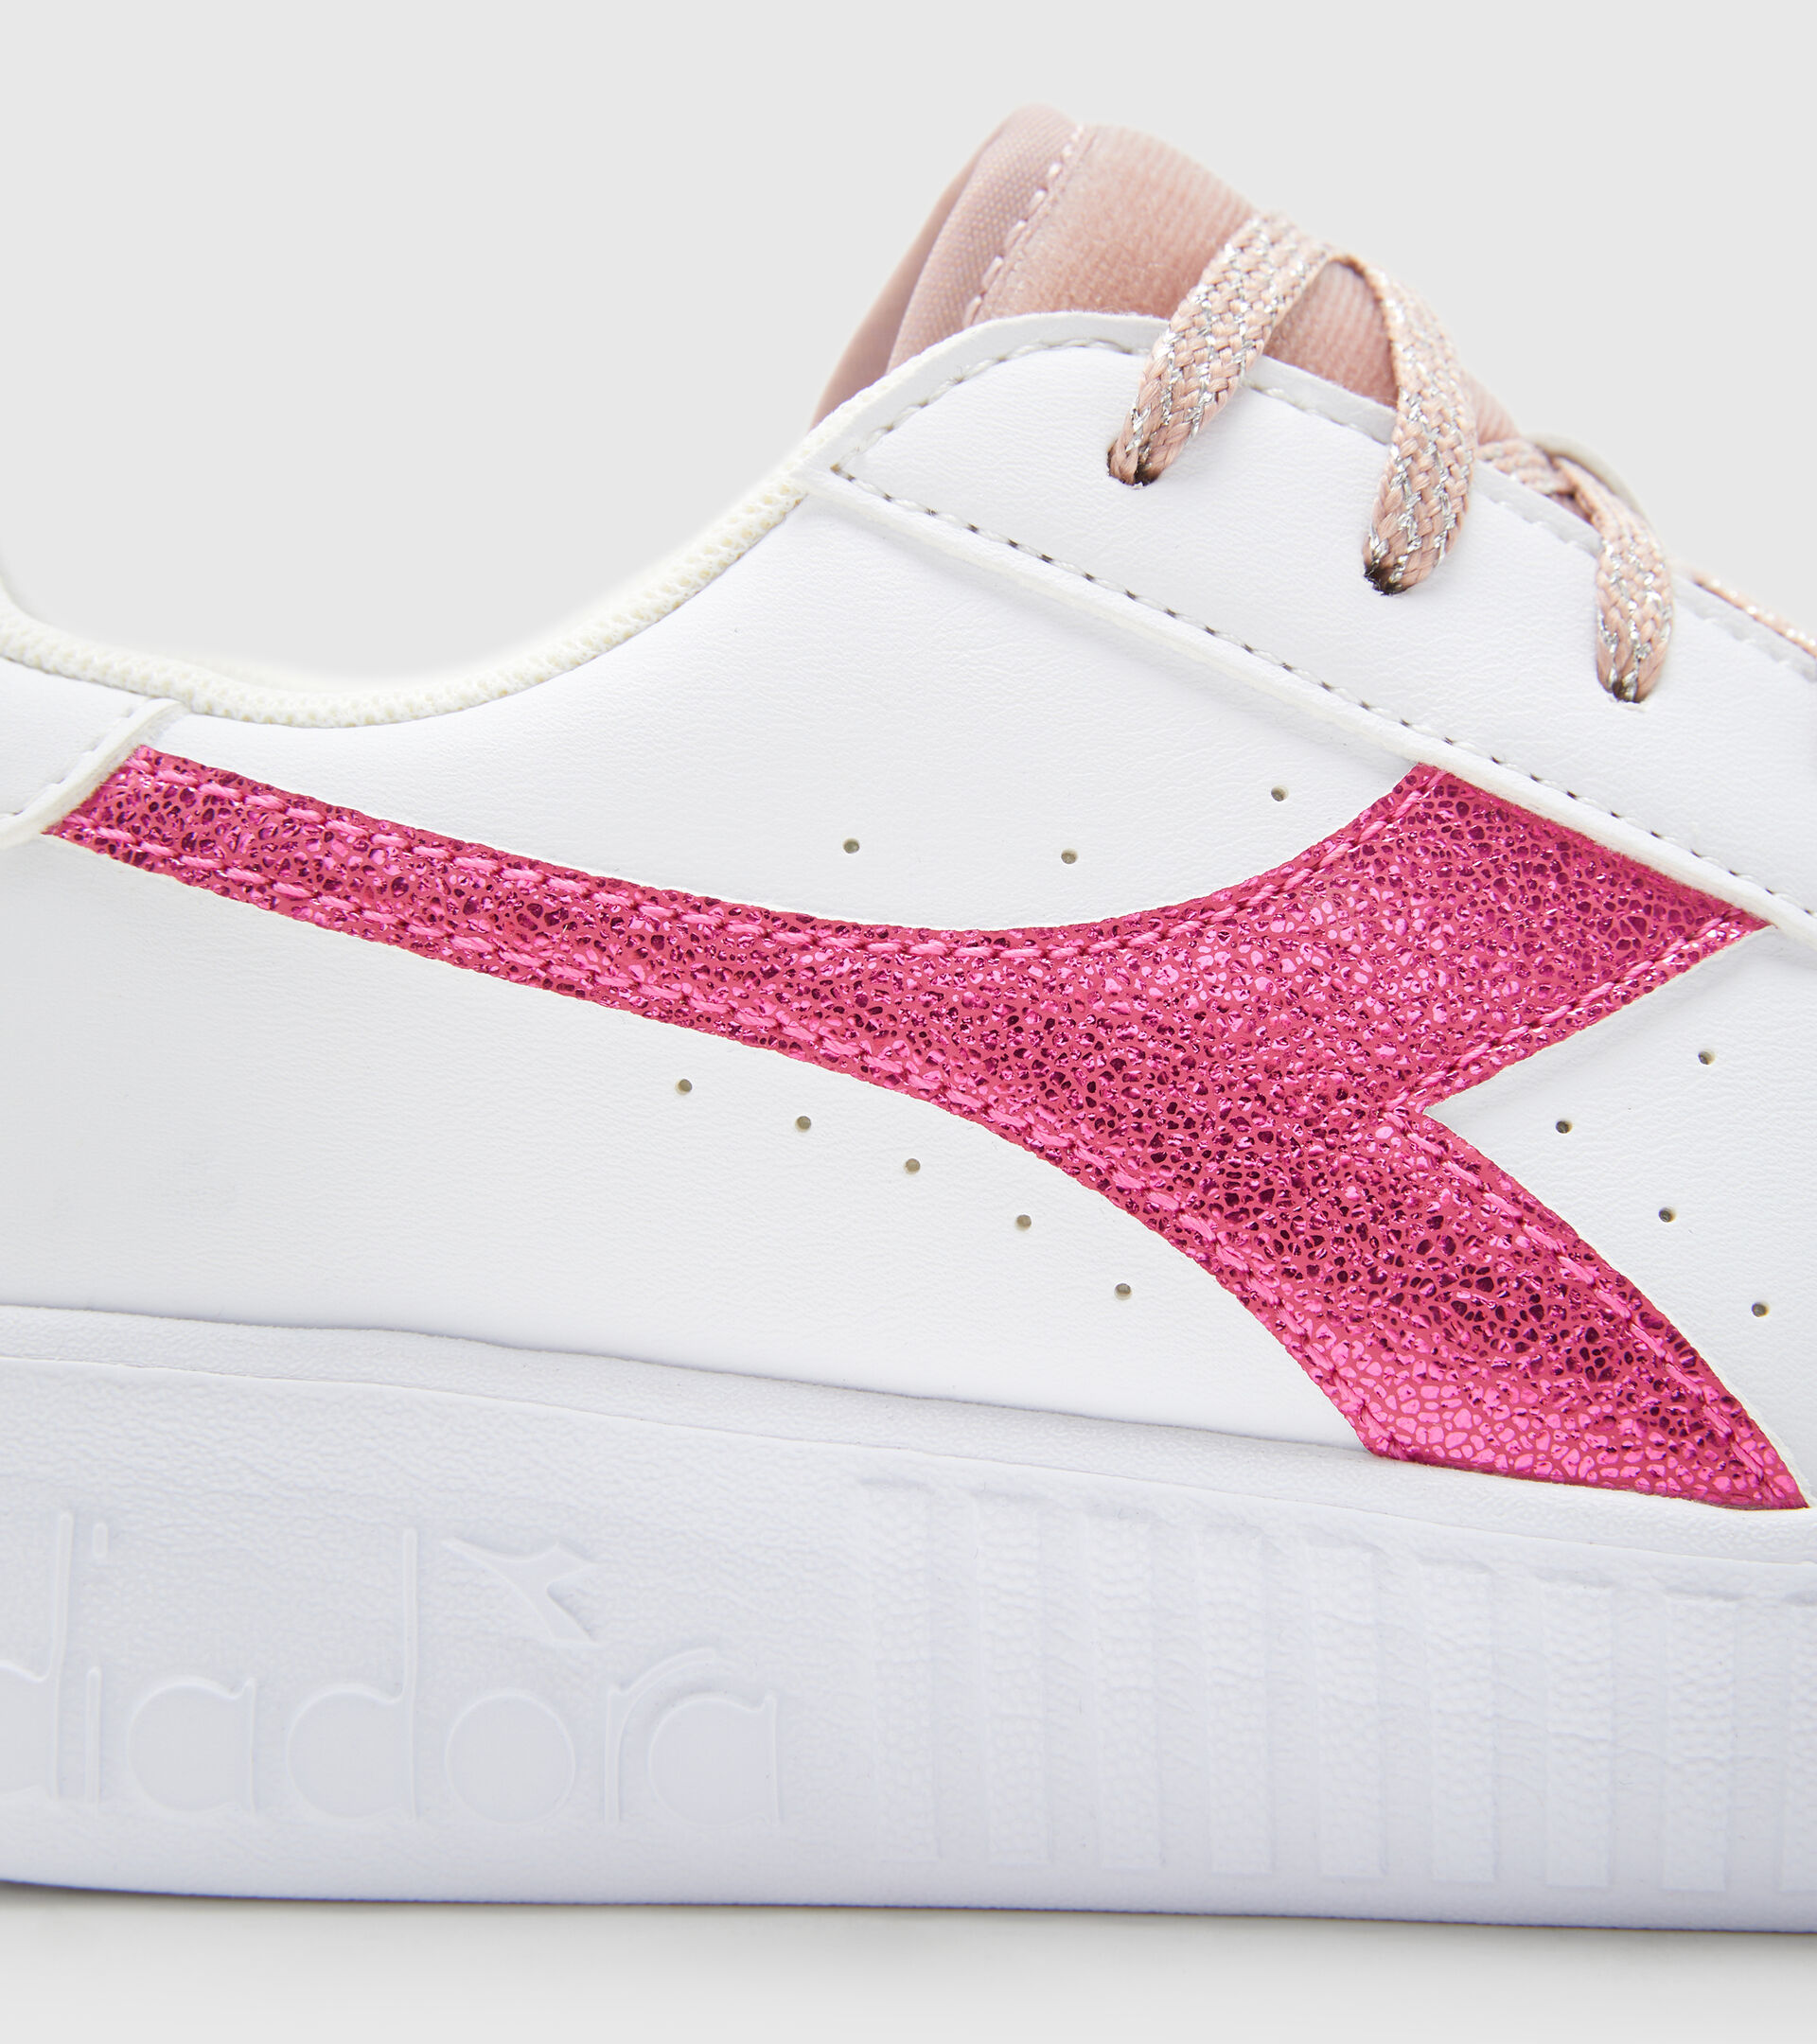 Sports shoes - Youth 8-16 years GAME STEP P METALLIC CRAQUELE GS WHITE/PINK LADY - Diadora